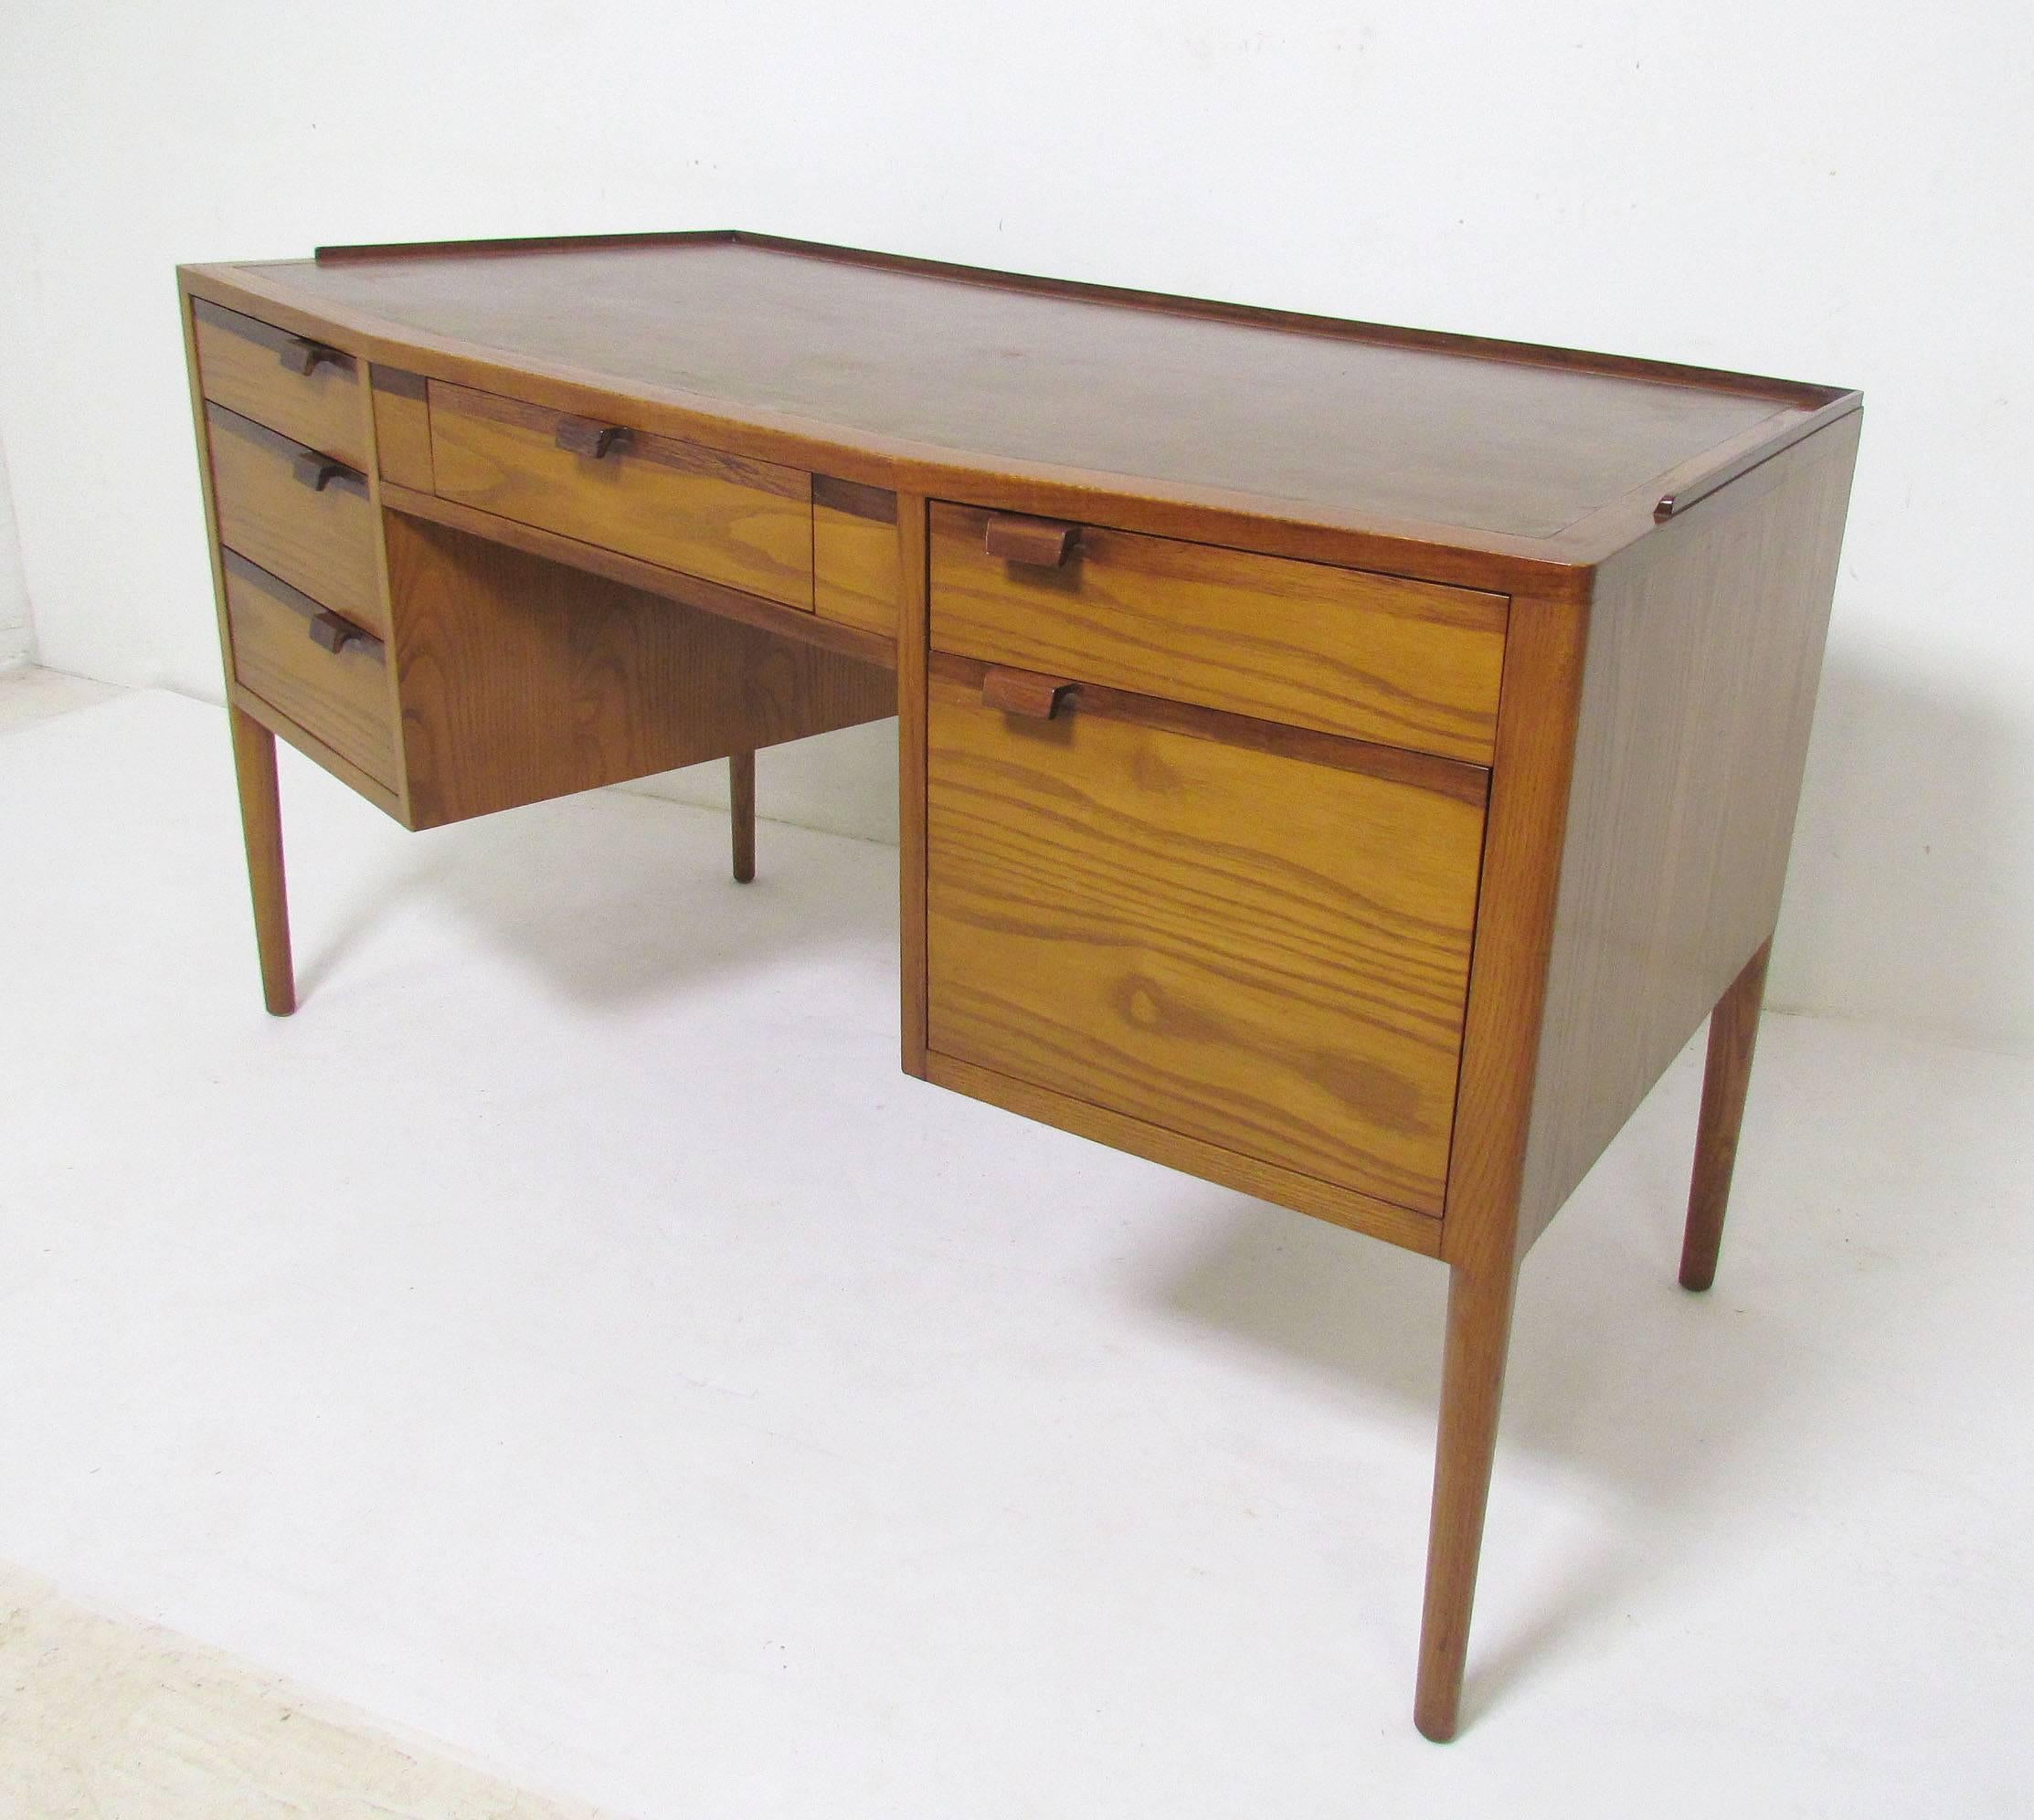 Elegant Edward Wormley for Dunbar writing desk in walnut with contrasting rosewood drawer handles and accents. Stylishly fanned top with pencil rail and a leather top. File drawer can be configured for letter or legal size.